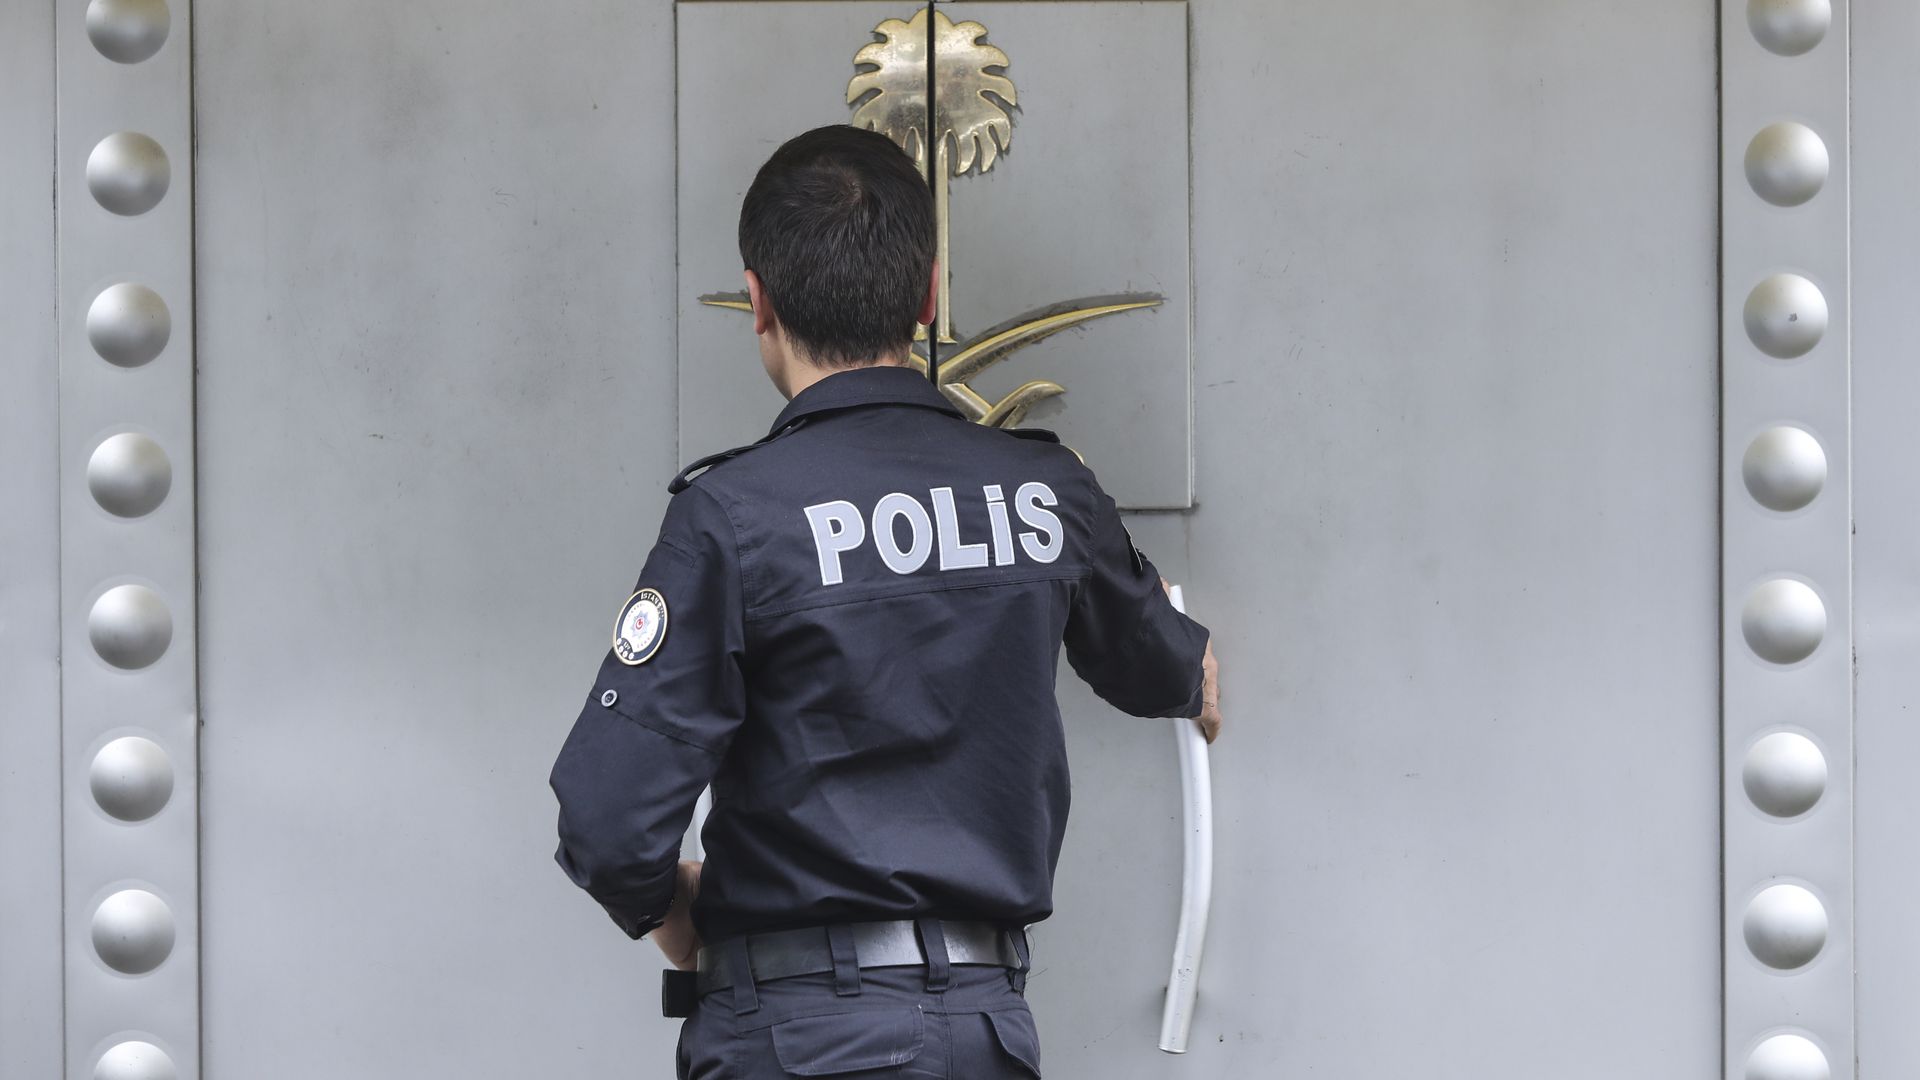 A Turkish police officer providing security enters the Saudi Arabia's consulate as they check papers of a man on October 12, 2018 in Istanbul, Turkey.